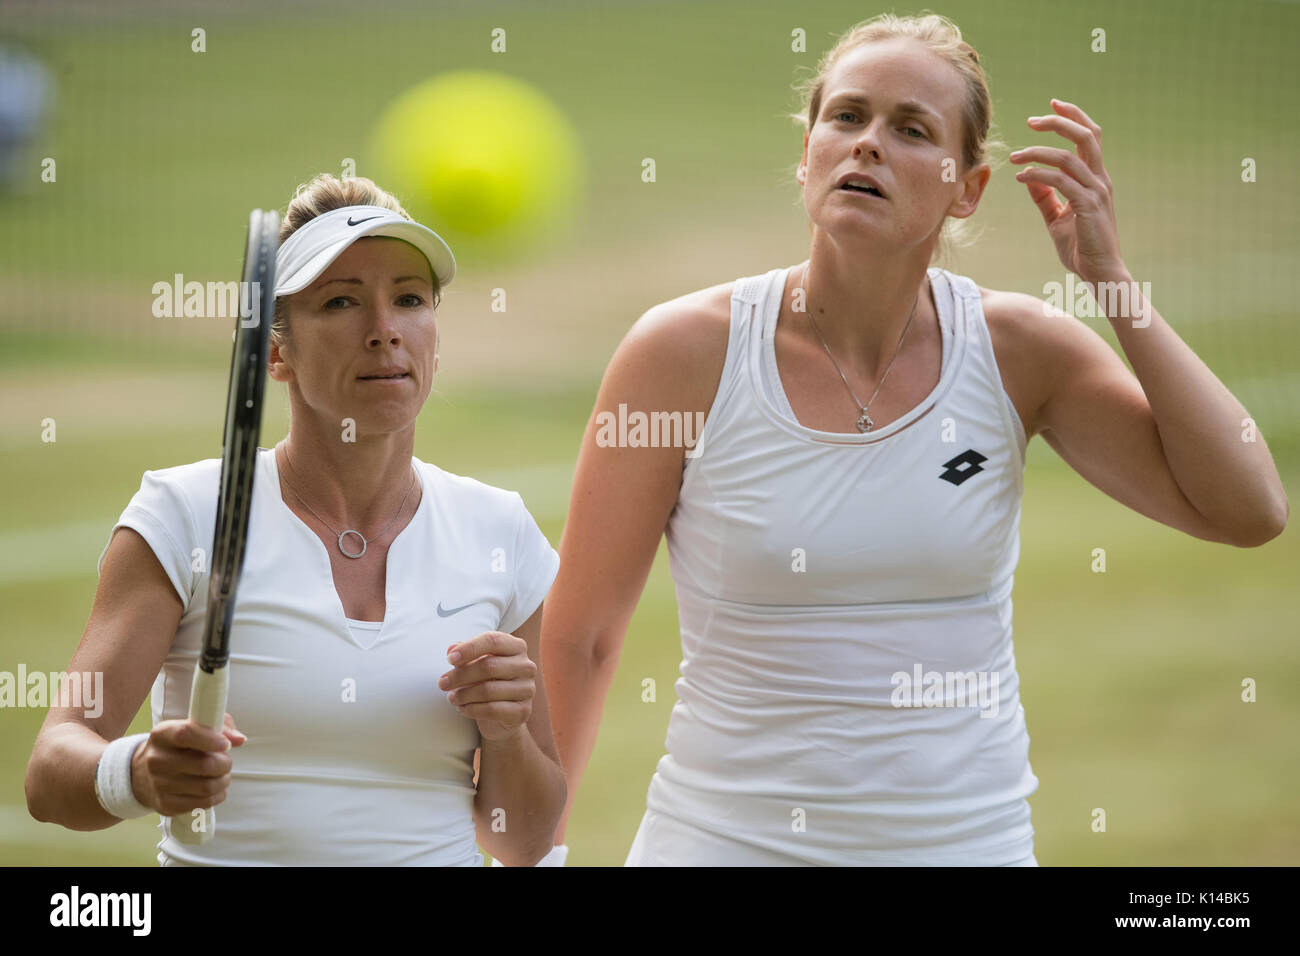 Anna-Lena Groenefeld of Germany and Kveta Peschke of the Czech Republic at the Ladies' Doubles - Wimbledon Championships 2017 Stock Photo